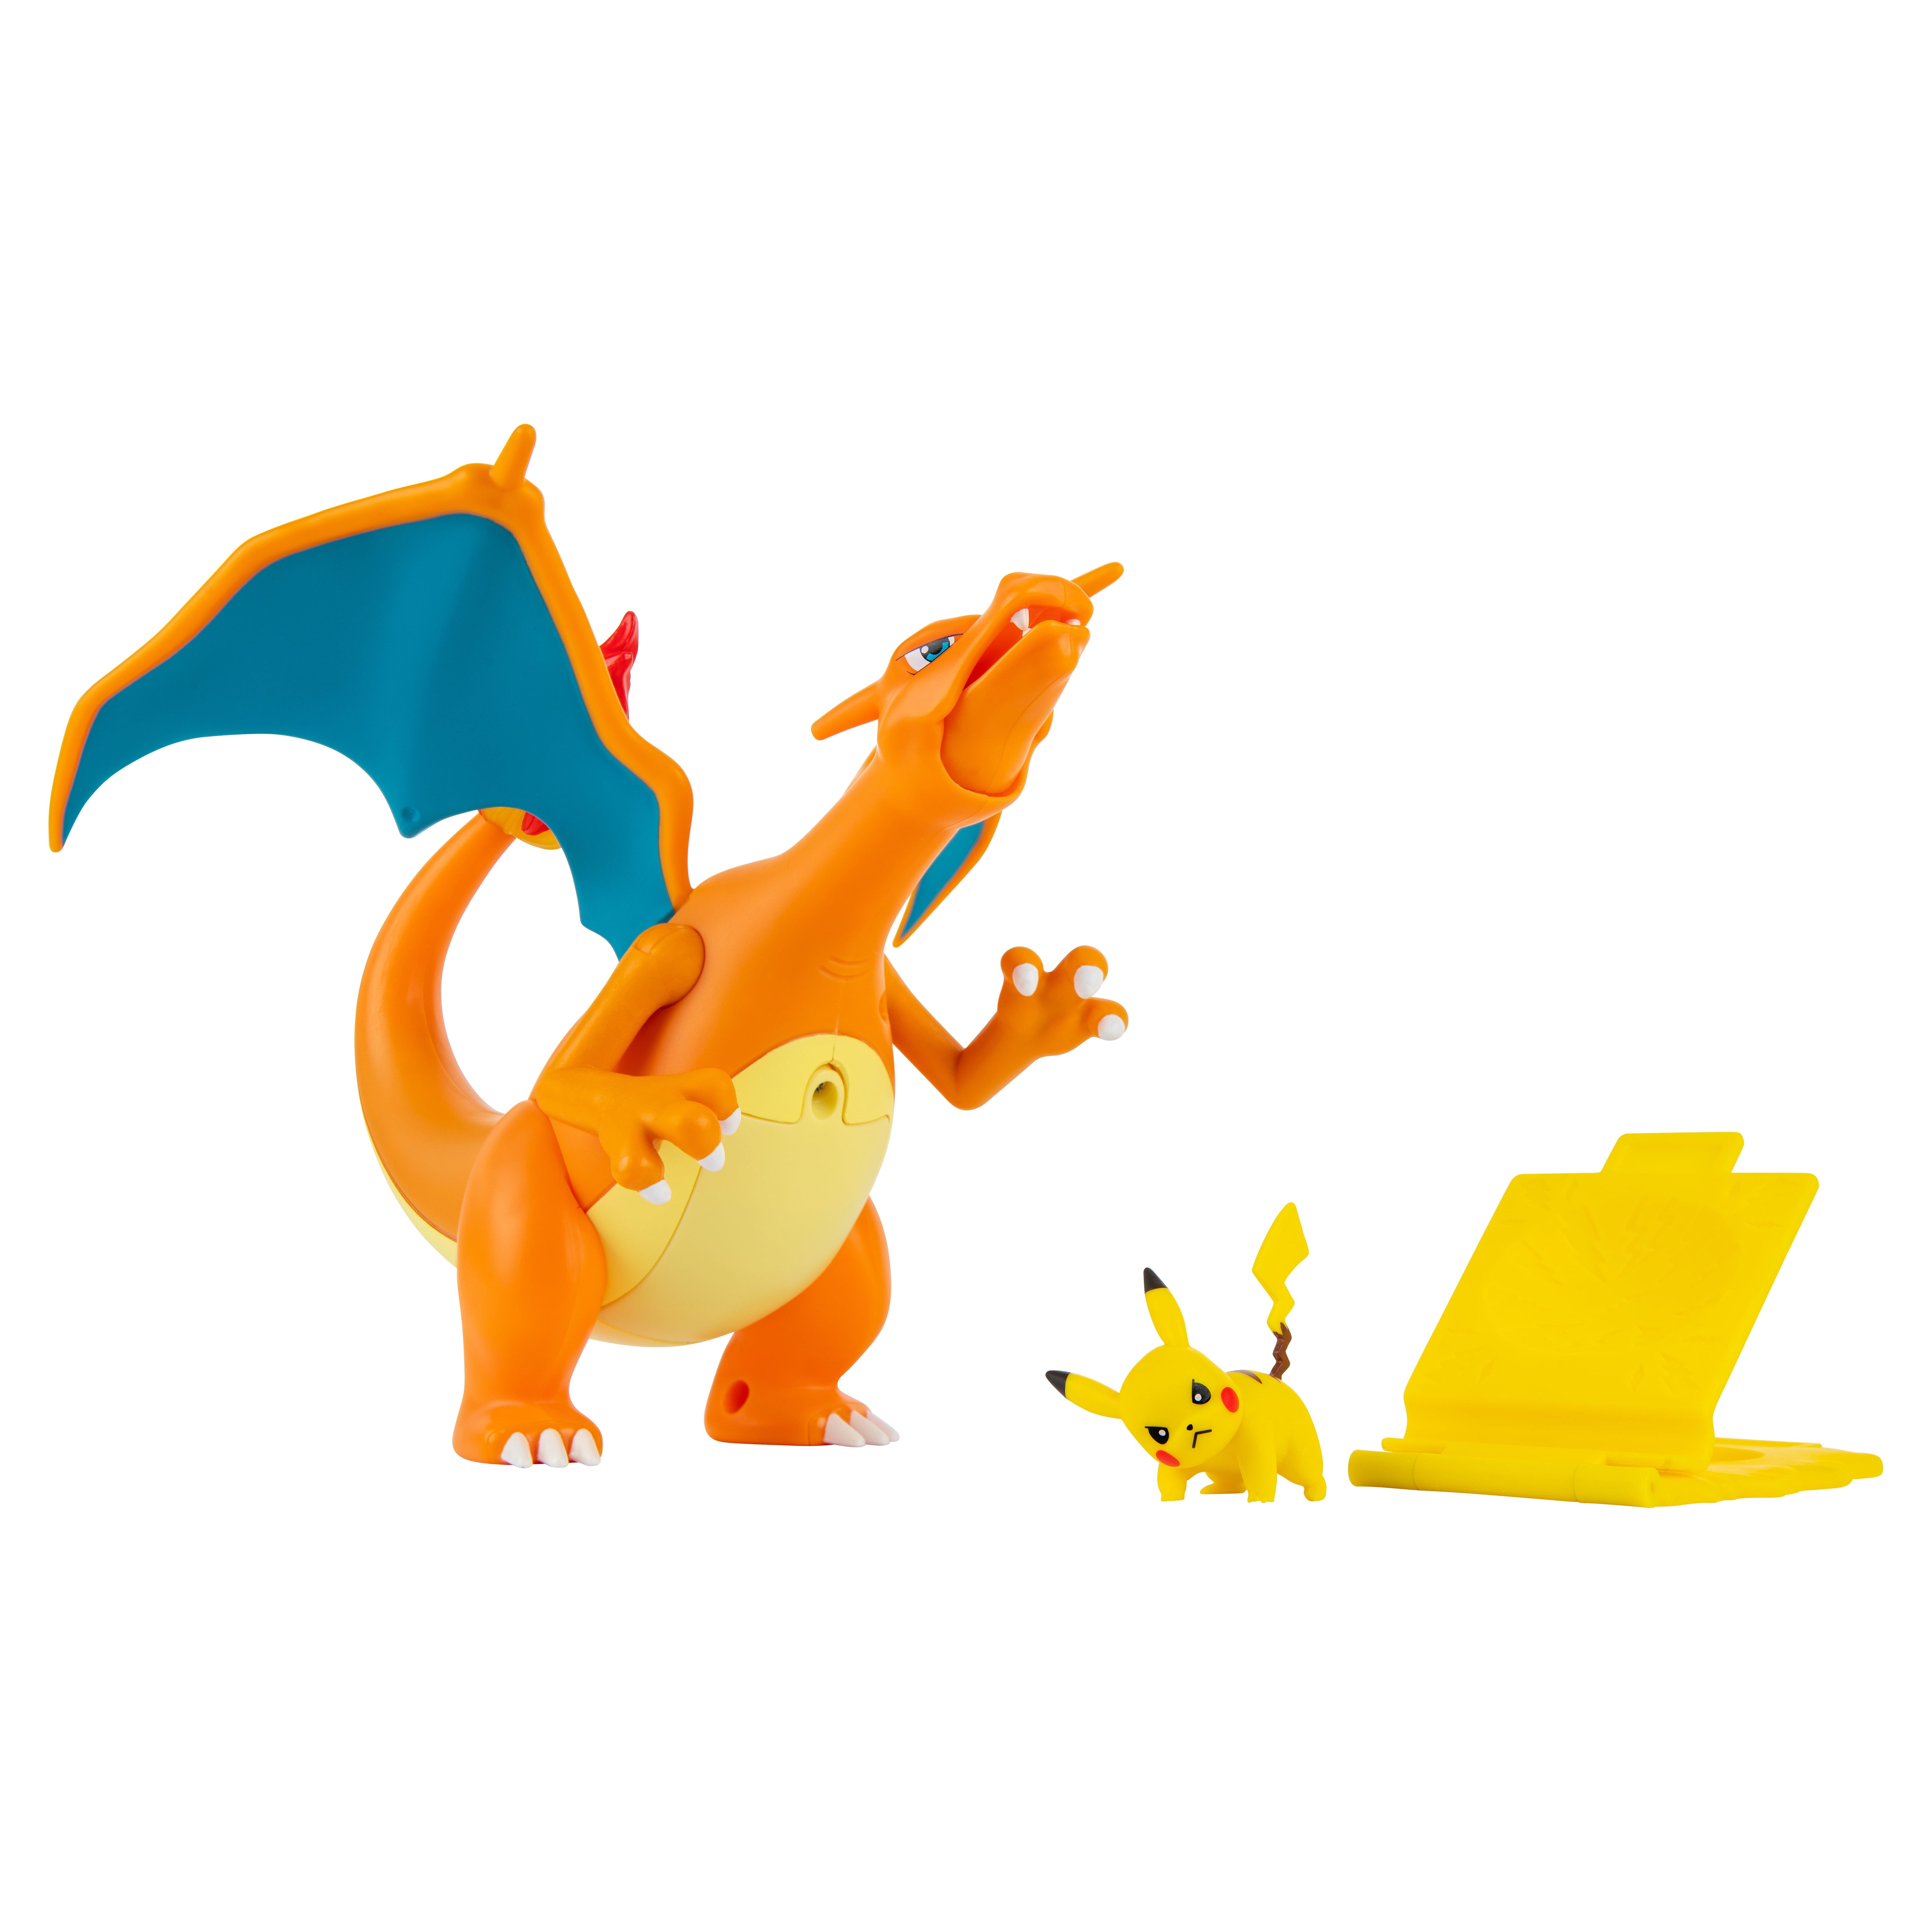 Pokemon Pikachu Charizard Anime Figures 3D Led Night Light Changing Model  Action Logo Lampara Collection Brinquedos Figm